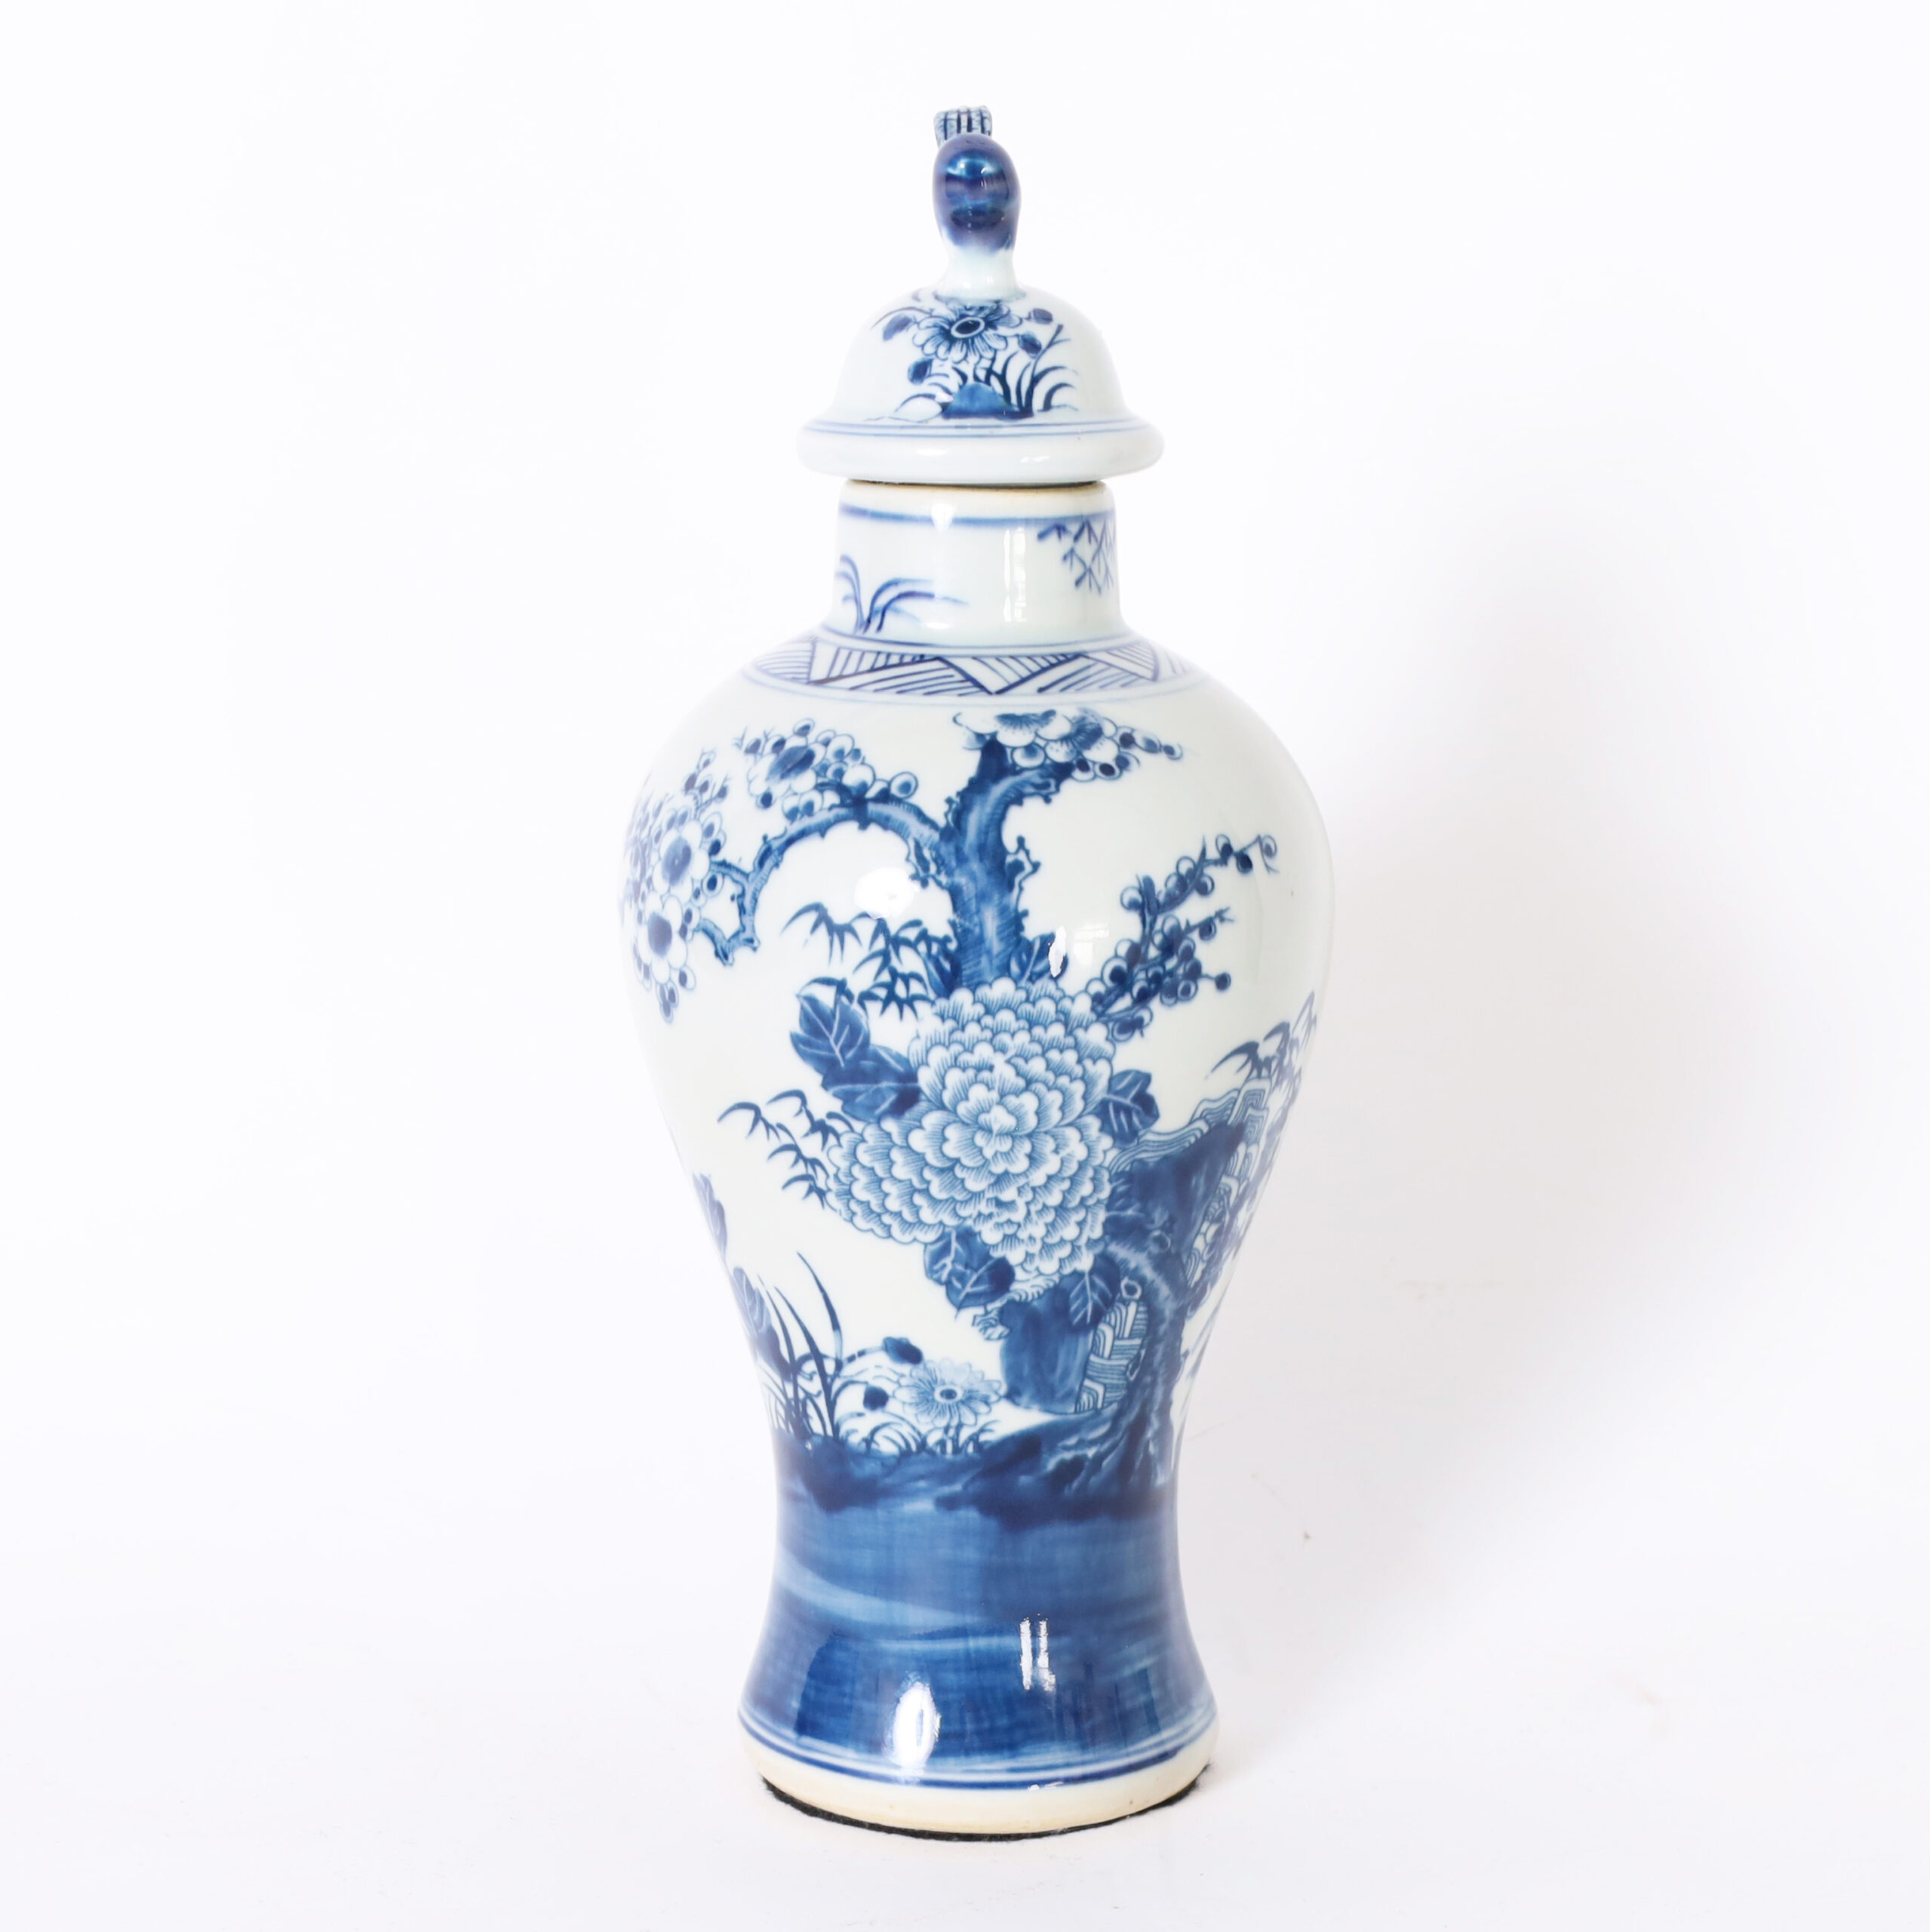 Pair of Chinese Blue and White Urns or Jars With Flowers